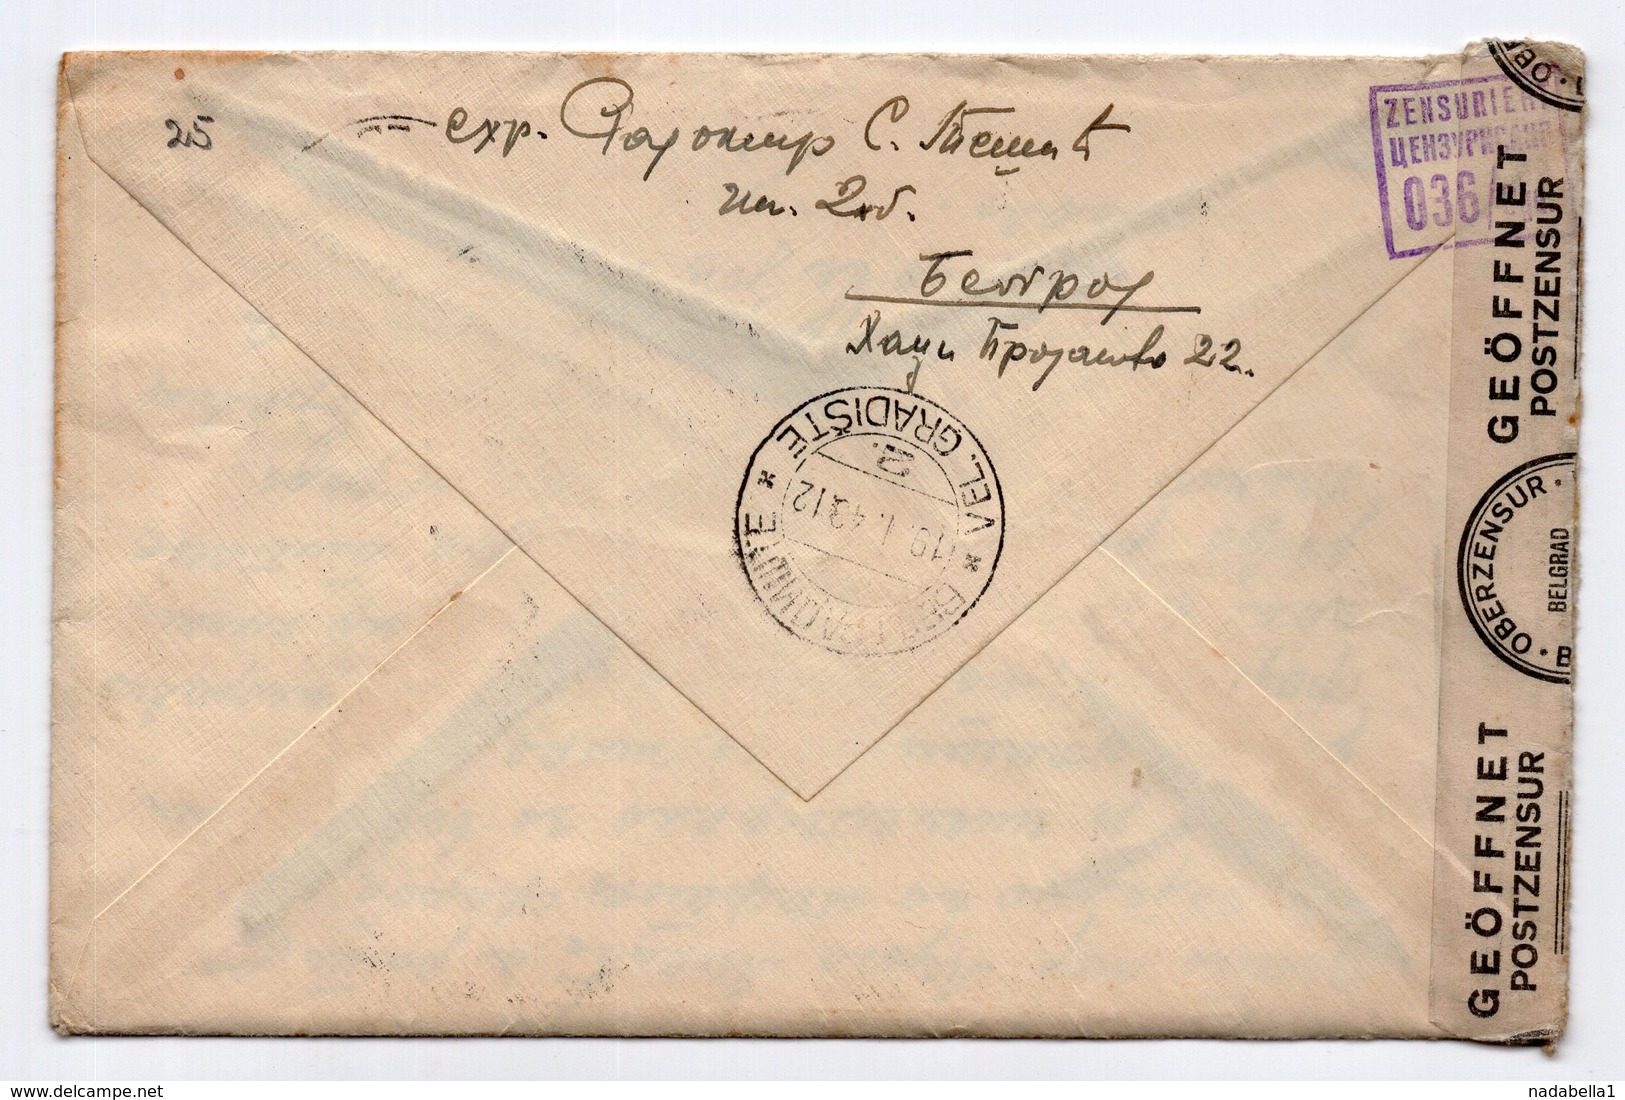 1943 WWII, GERMAN OCCUPATION OF SERBIA,CENSORED,BELGRADE TO V. PLANA,12 DINARA PETER STAMP ON COVER - Serbia